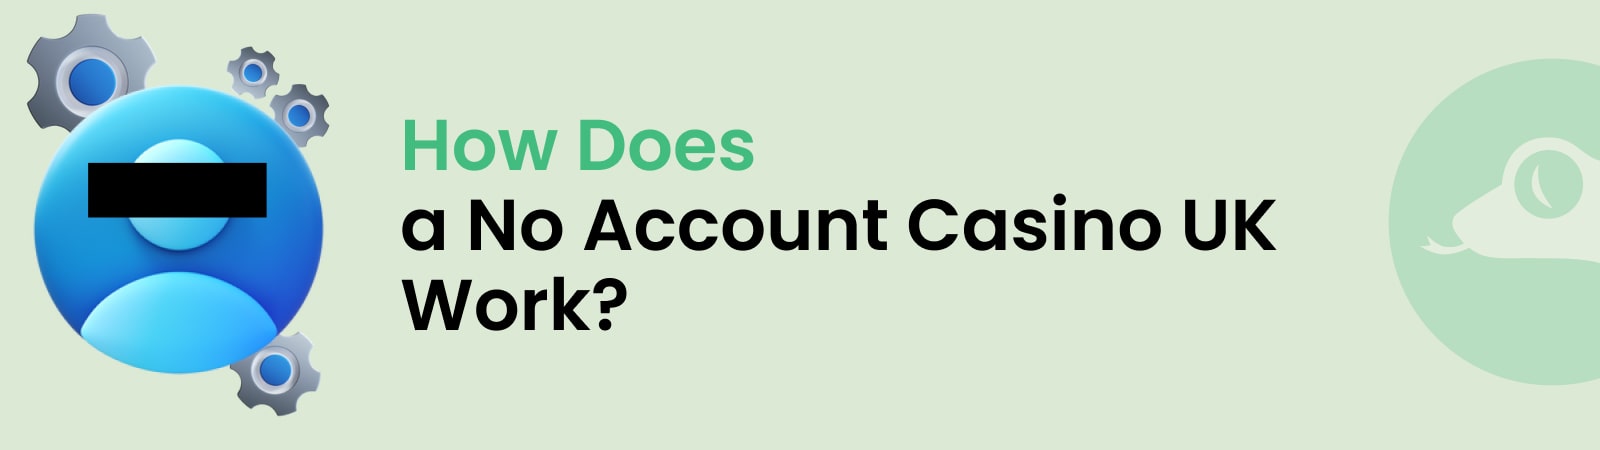 how does a no account casino uk work